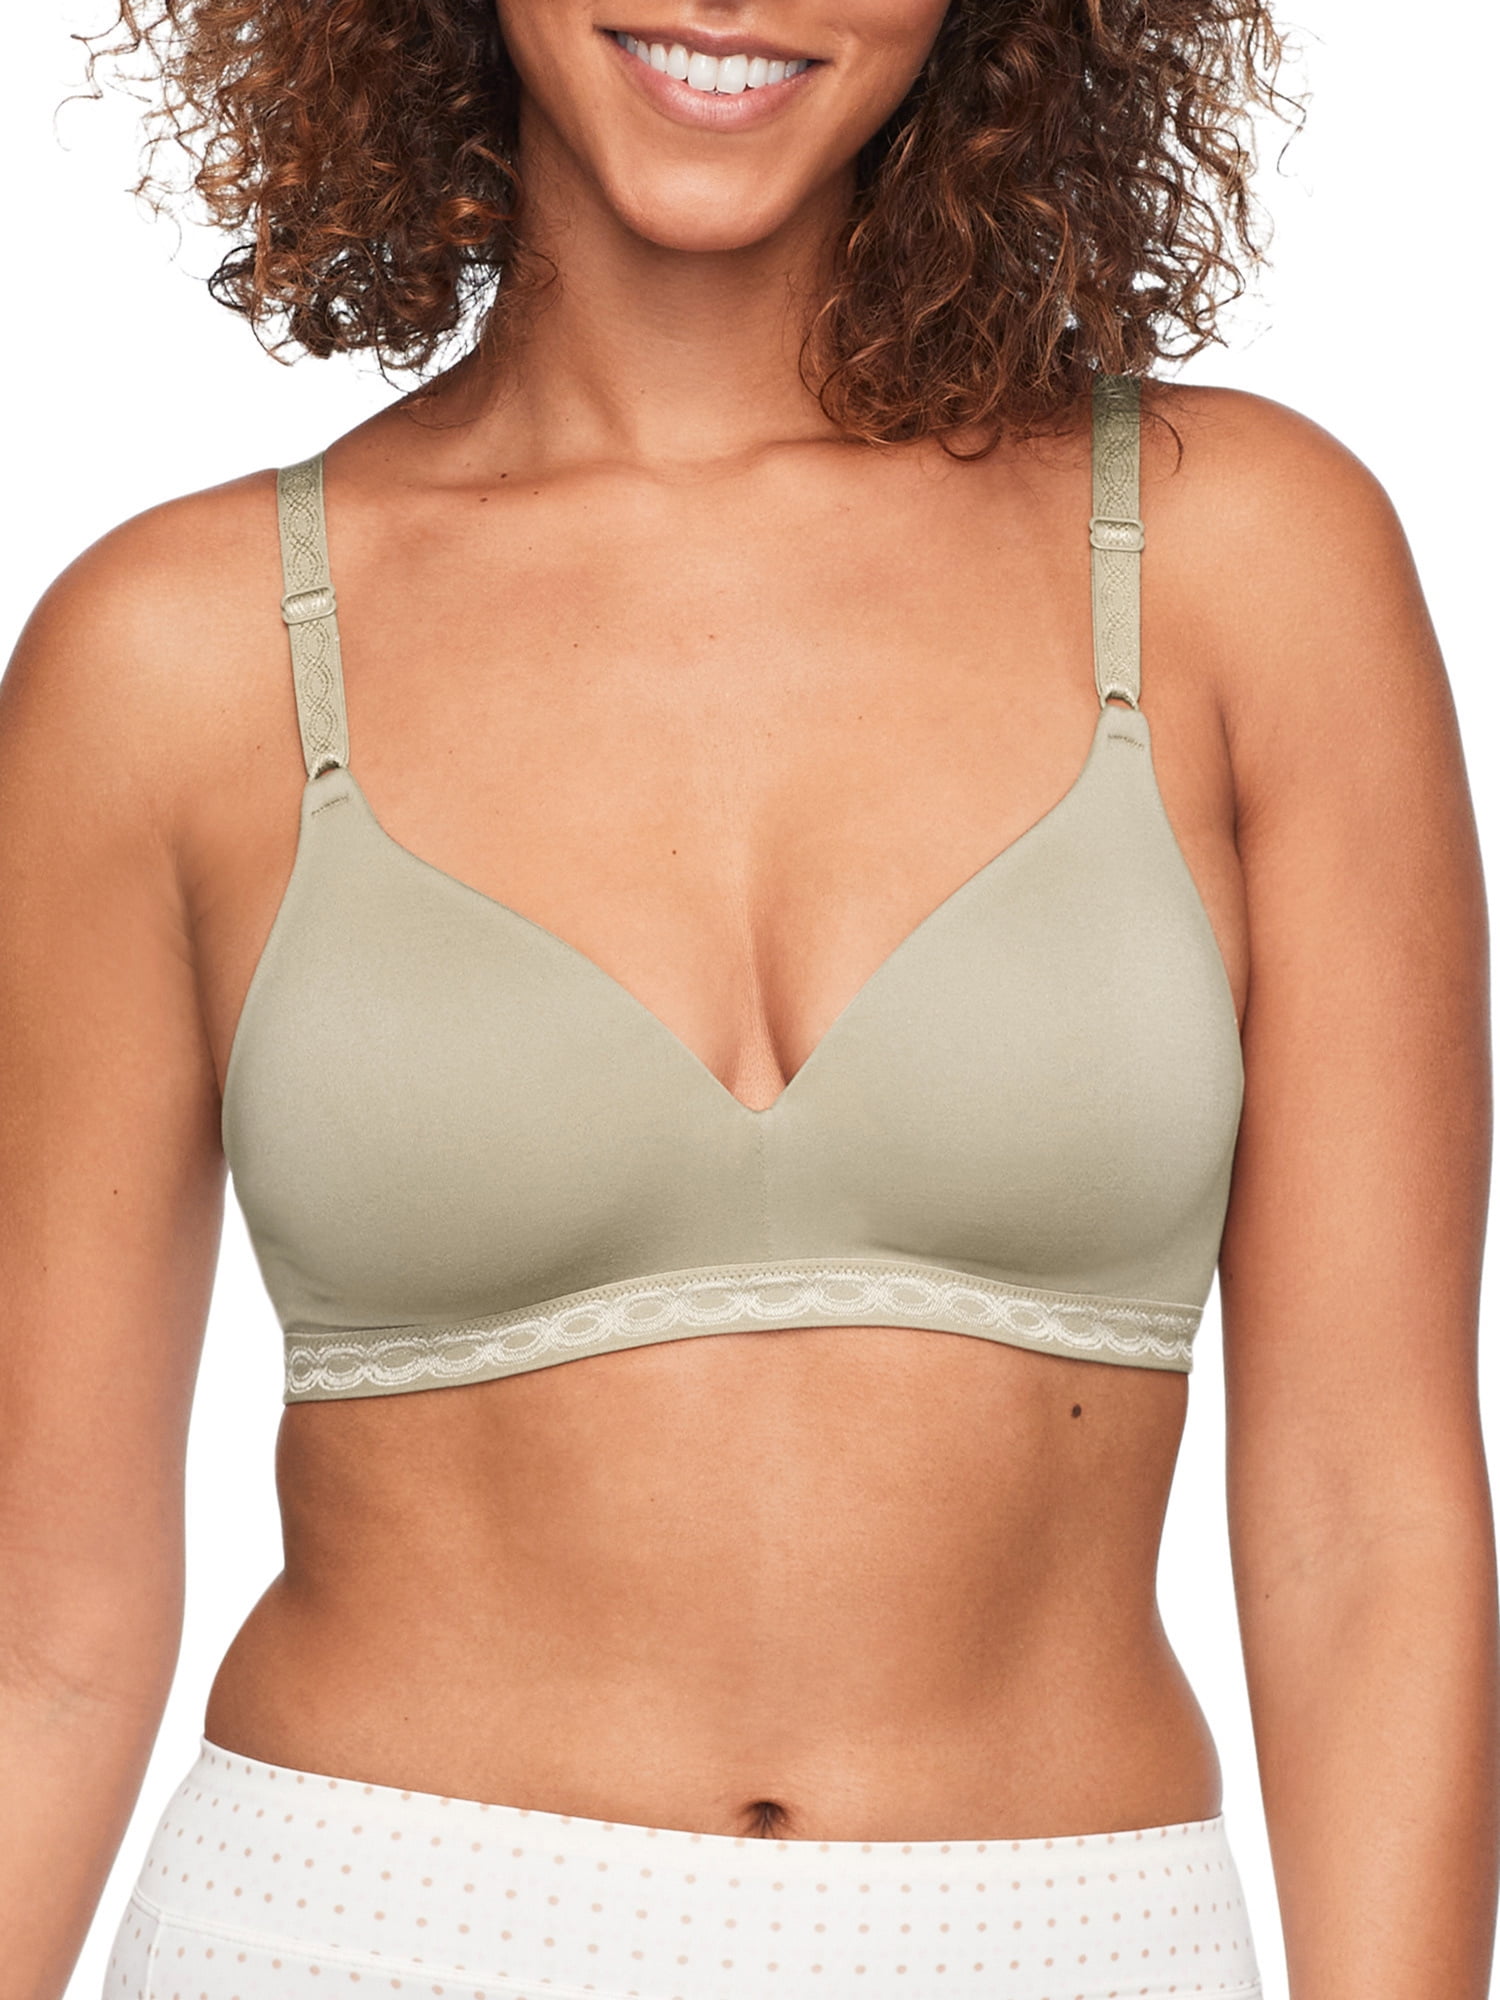 Warners Blissful Benefits Super Soft Bra and 32 similar items